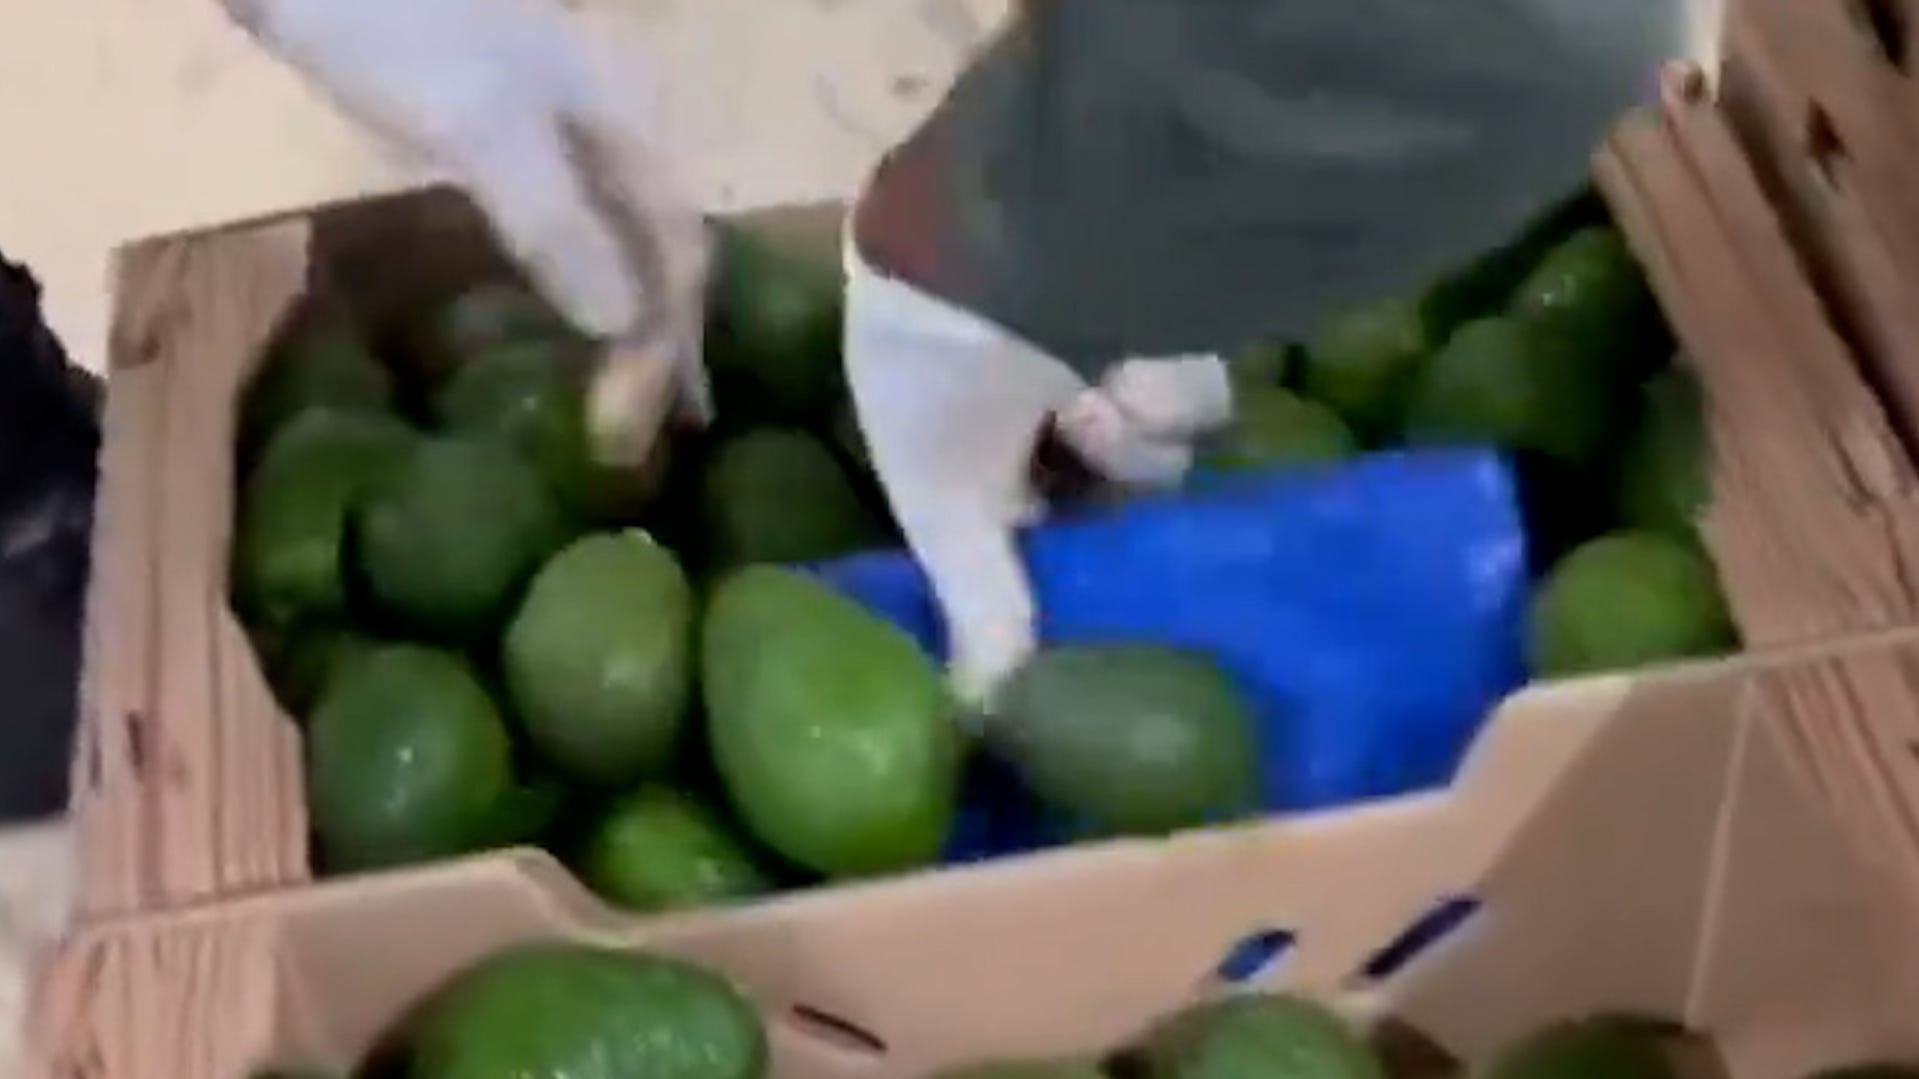 Colombian authorities make cocaine bust in avocado shipment